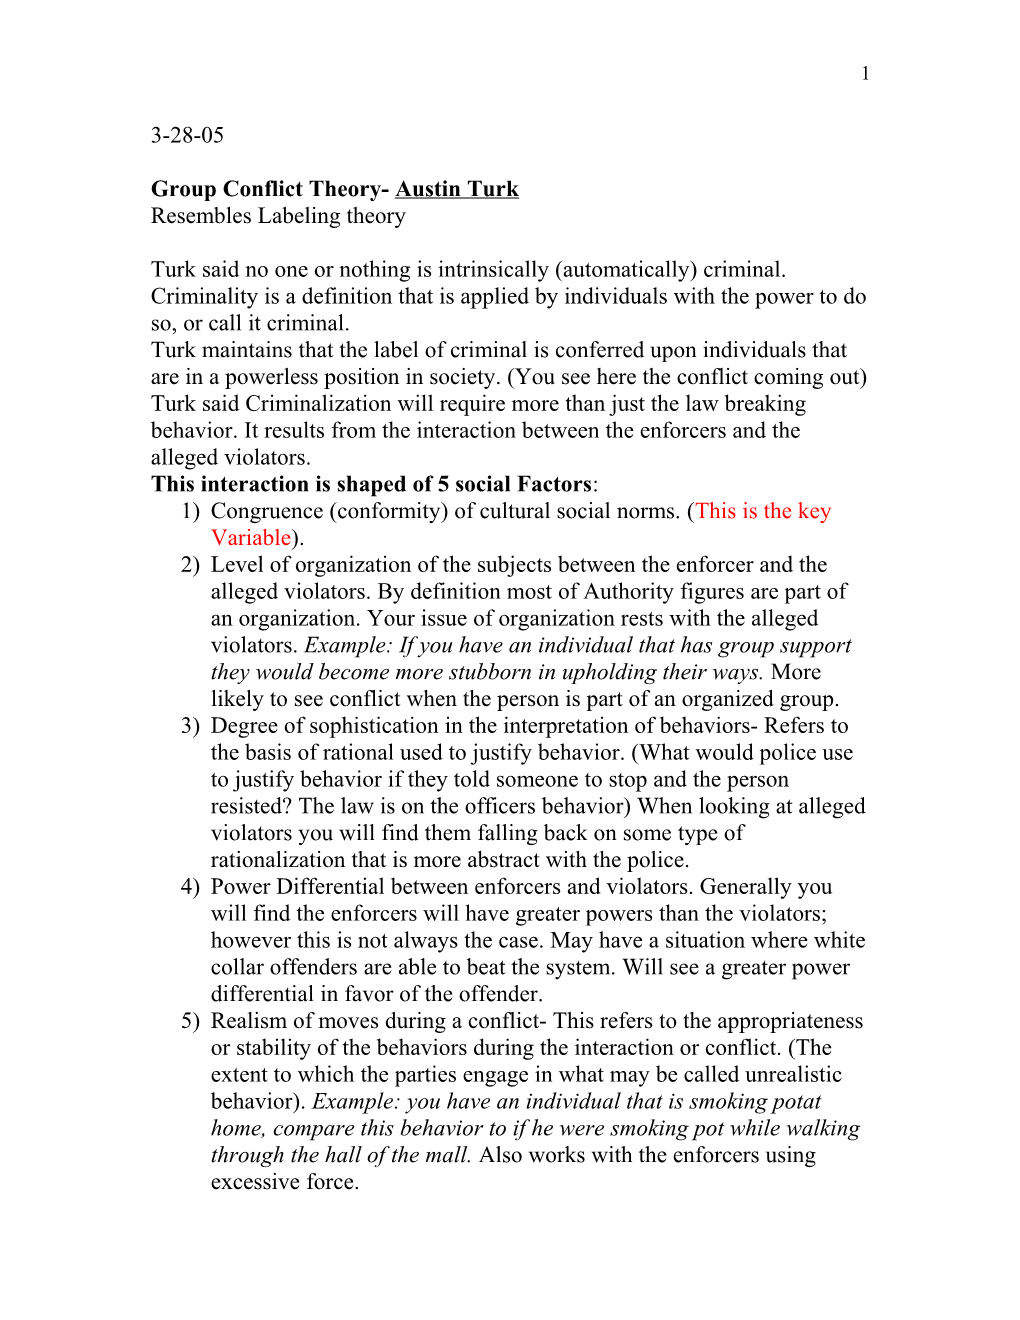 Group Conflict Theory- Austin Turk